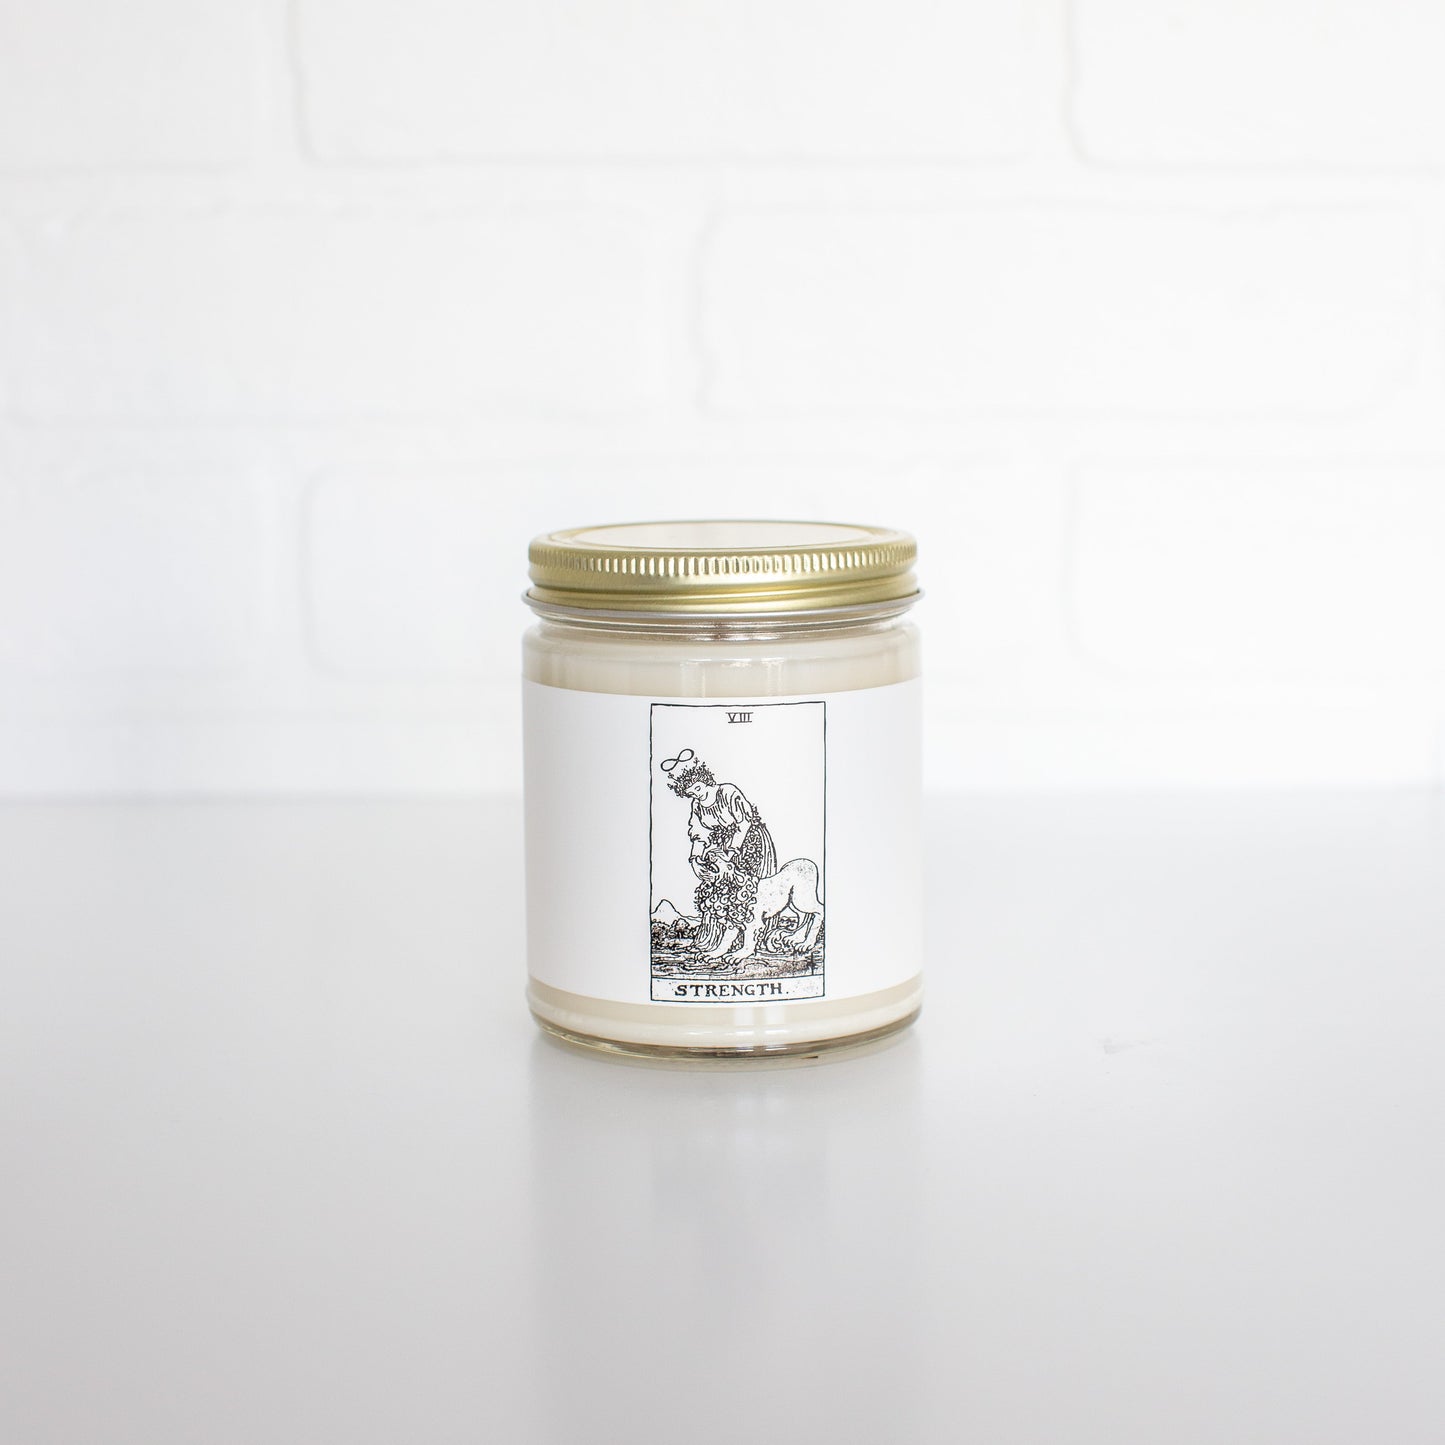 Strength Soy Candle - ROOTE - Soy Candle